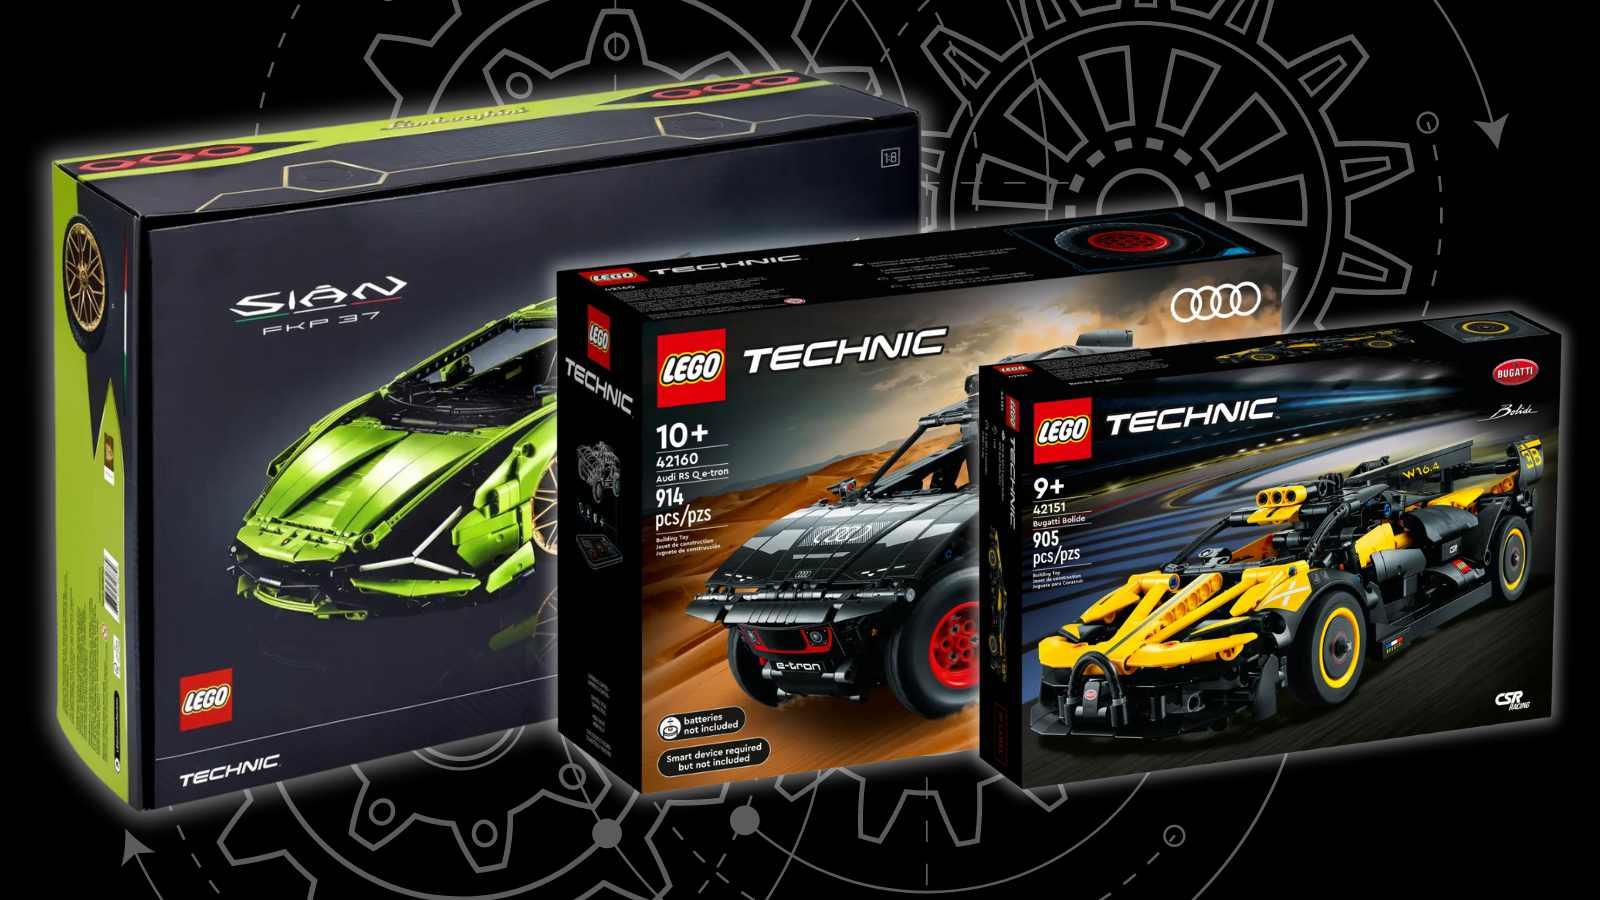 Three of the LEGO Technic sets discounted at Walmart